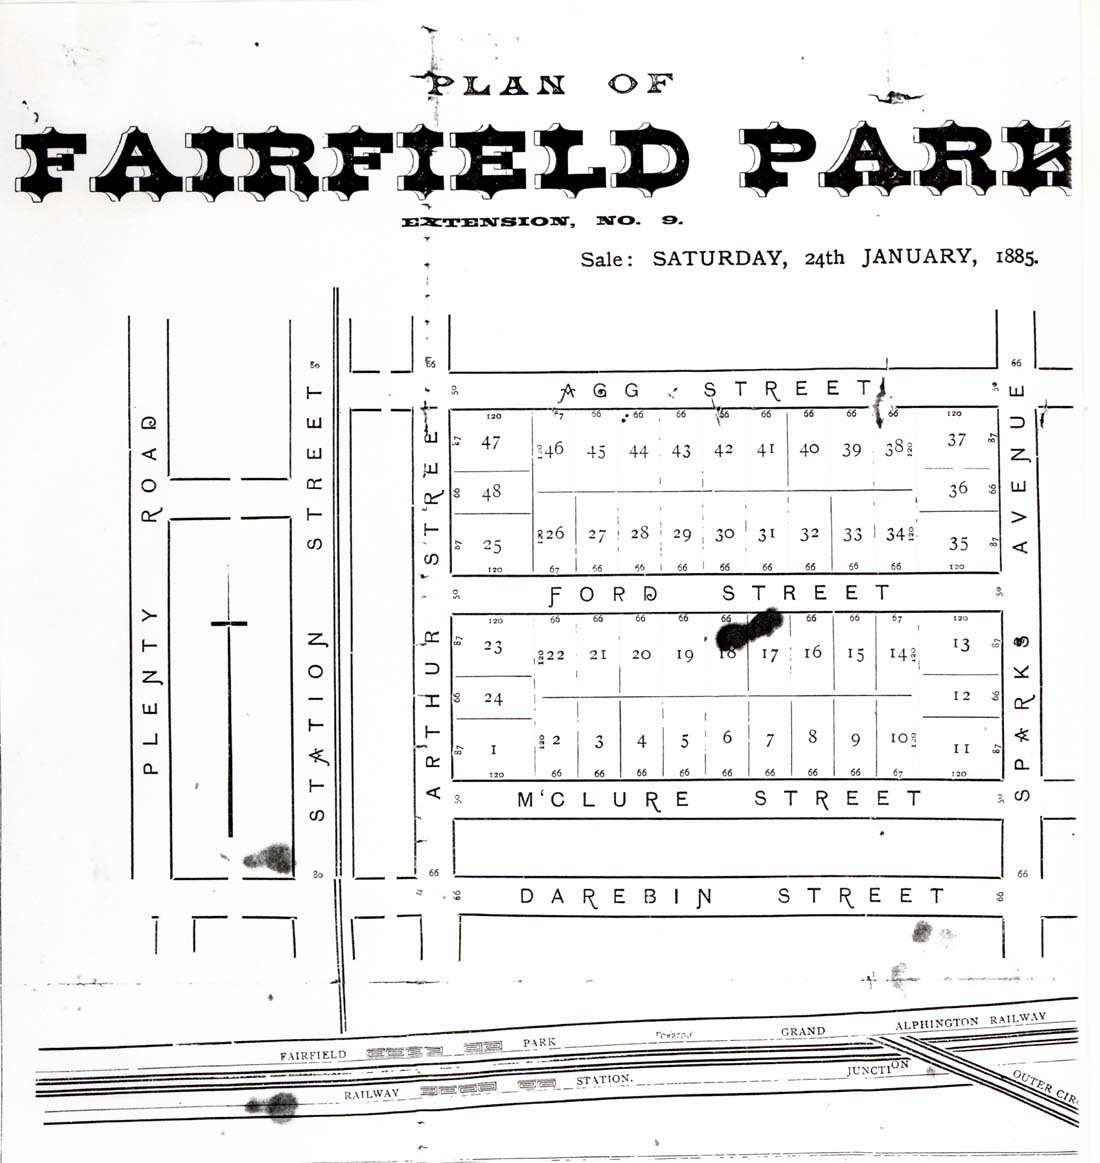 Image of an advertisement for Fairfield Park Estate